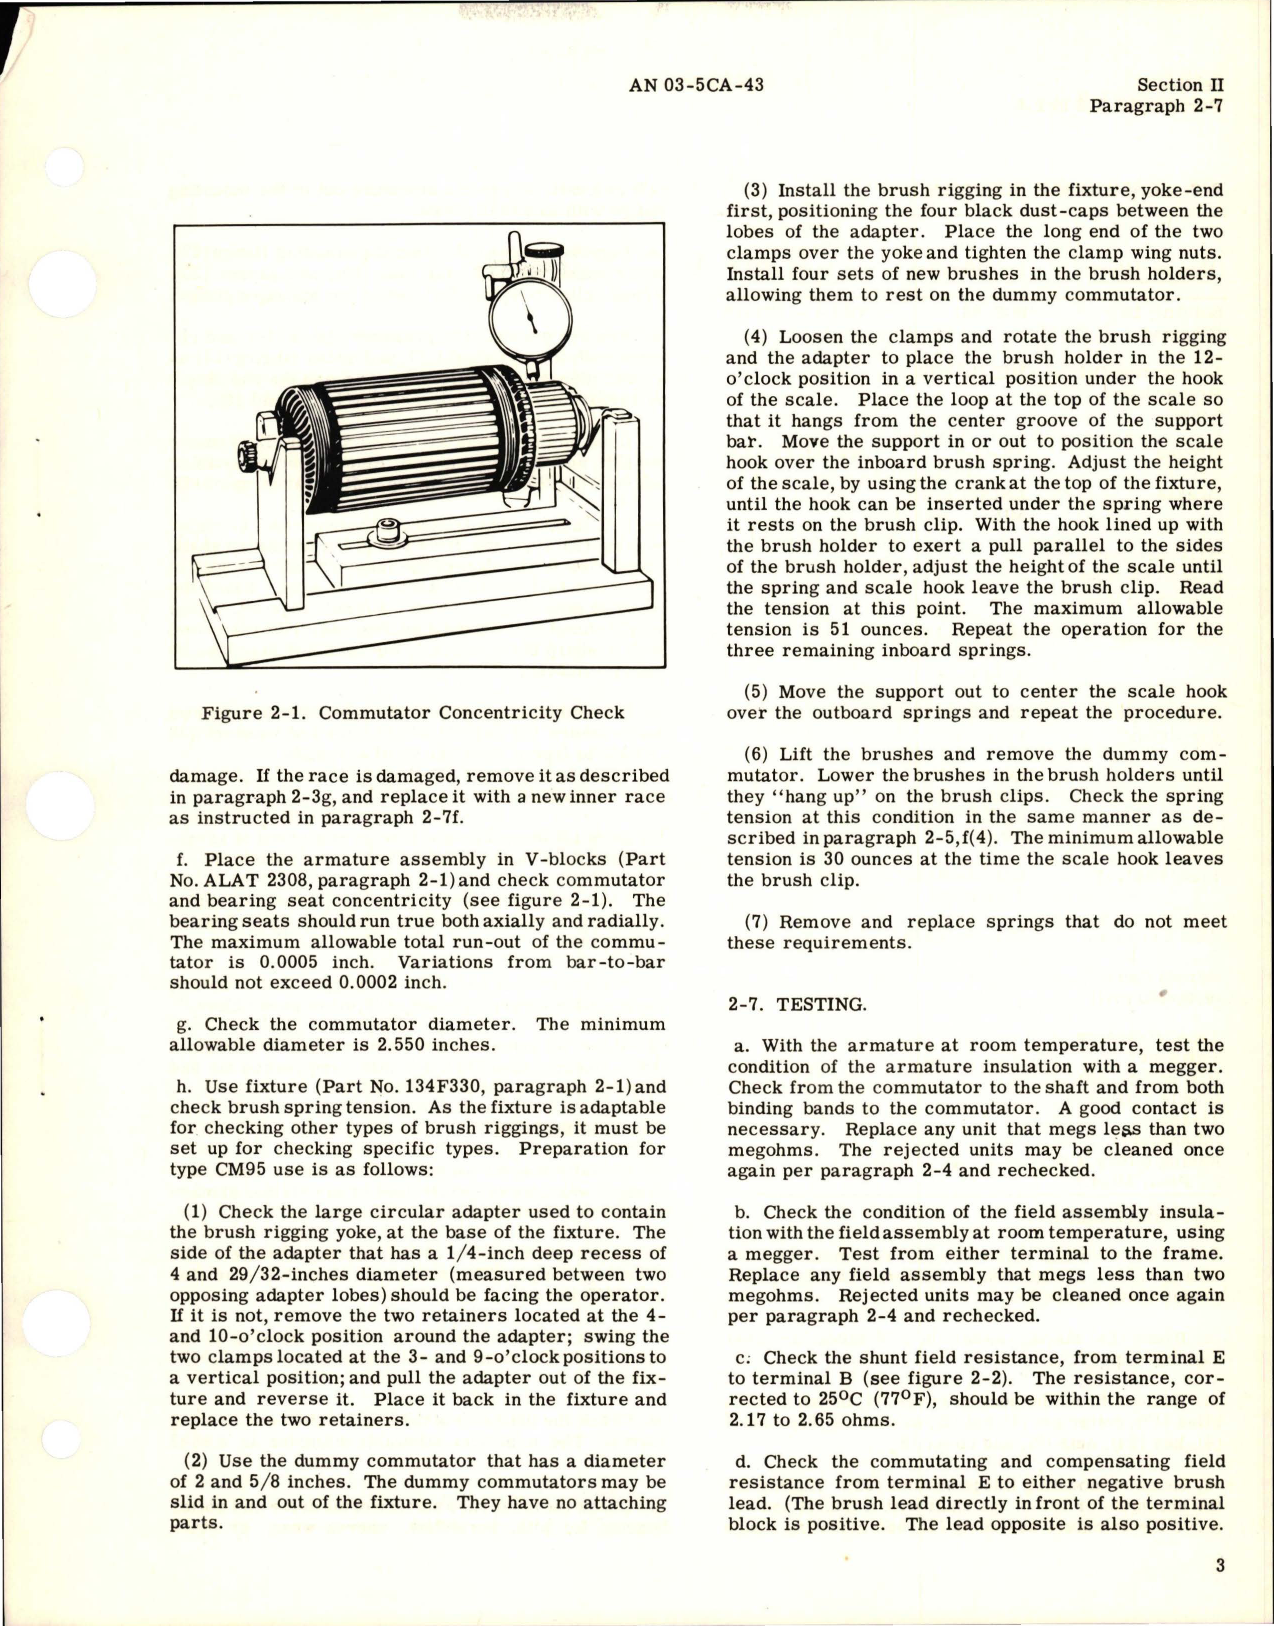 Sample page 7 from AirCorps Library document: Overhaul Instructions for Starter Motors - Models 2CM95B13, 2CM95B18, and 2CM95B19 